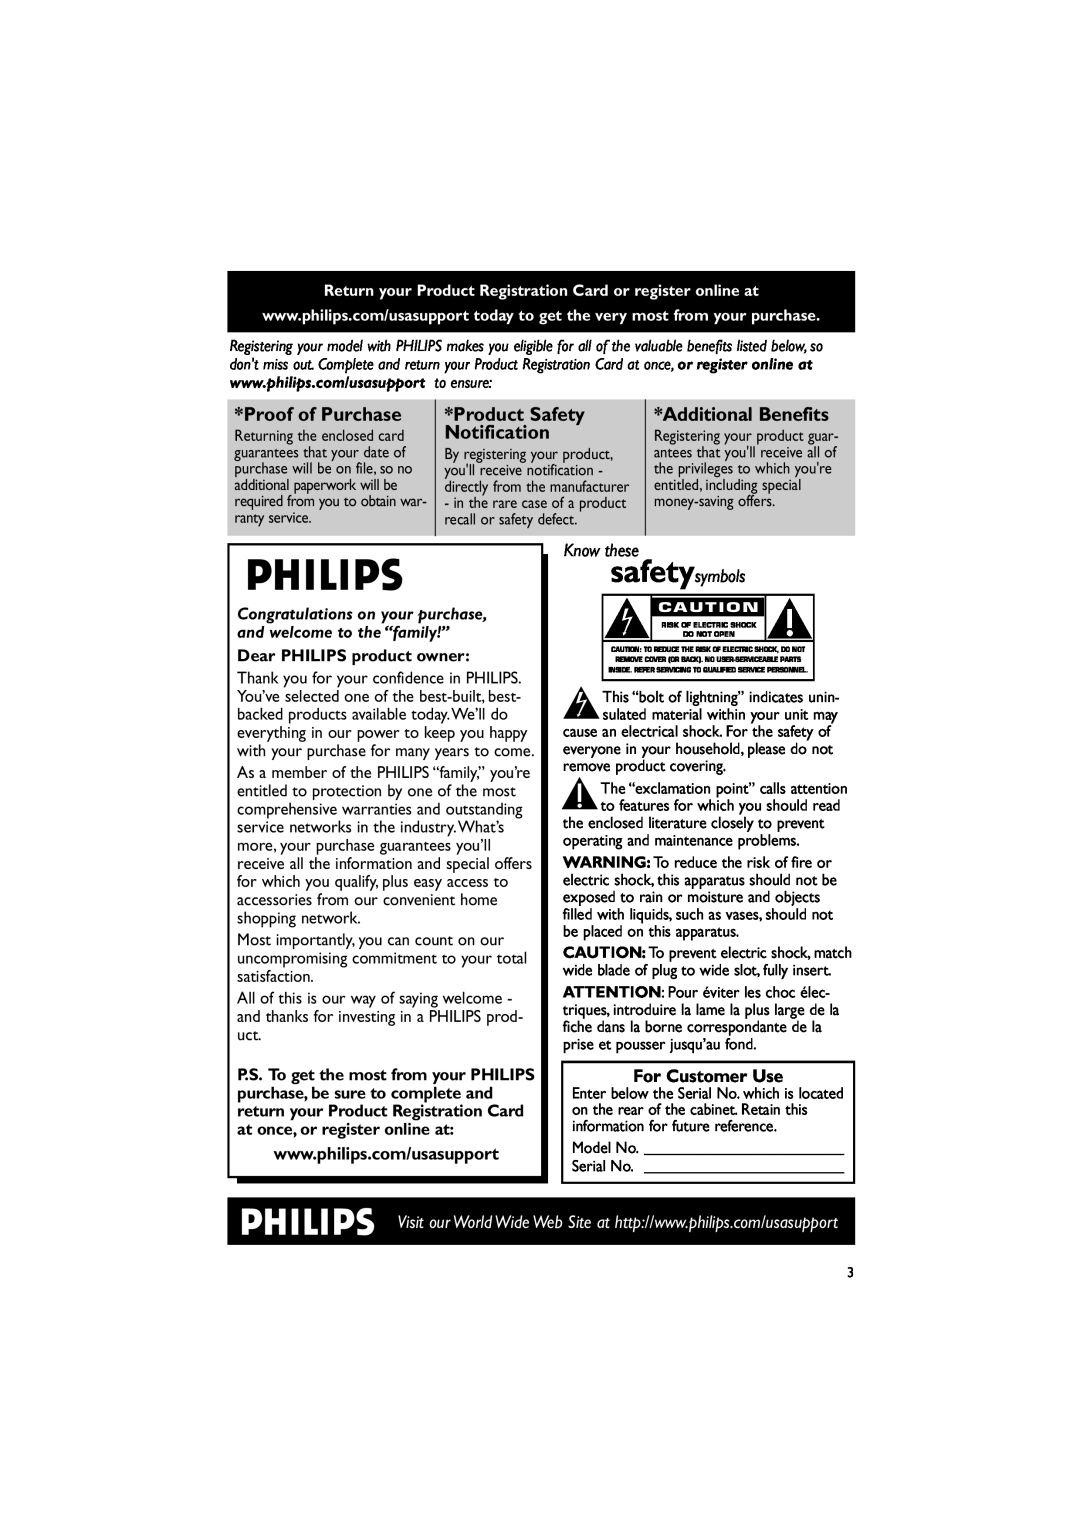 Philips MCD139 Proof of Purchase, Product Safety, Additional Benefits, Notification, Dear PHILIPS product owner 